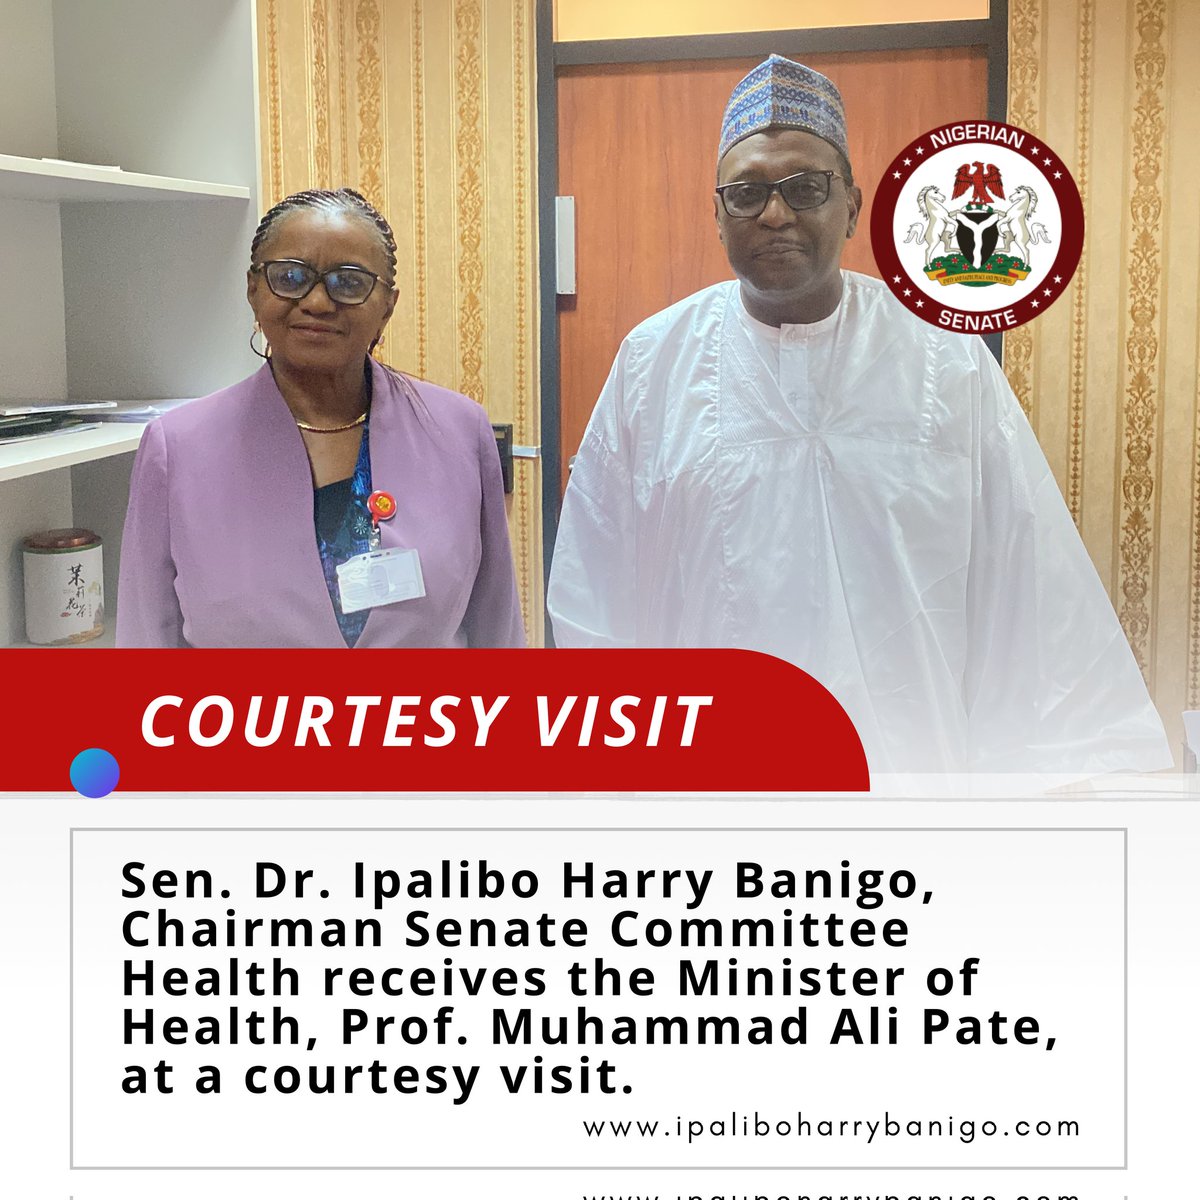 I warmly welcomed the distinguished Minister of Health, Prof. Muhammad Ali Pate, during a courtesy visit underscoring my commitment to advancing Healthcare policies and initiatives that positively impact our nation.